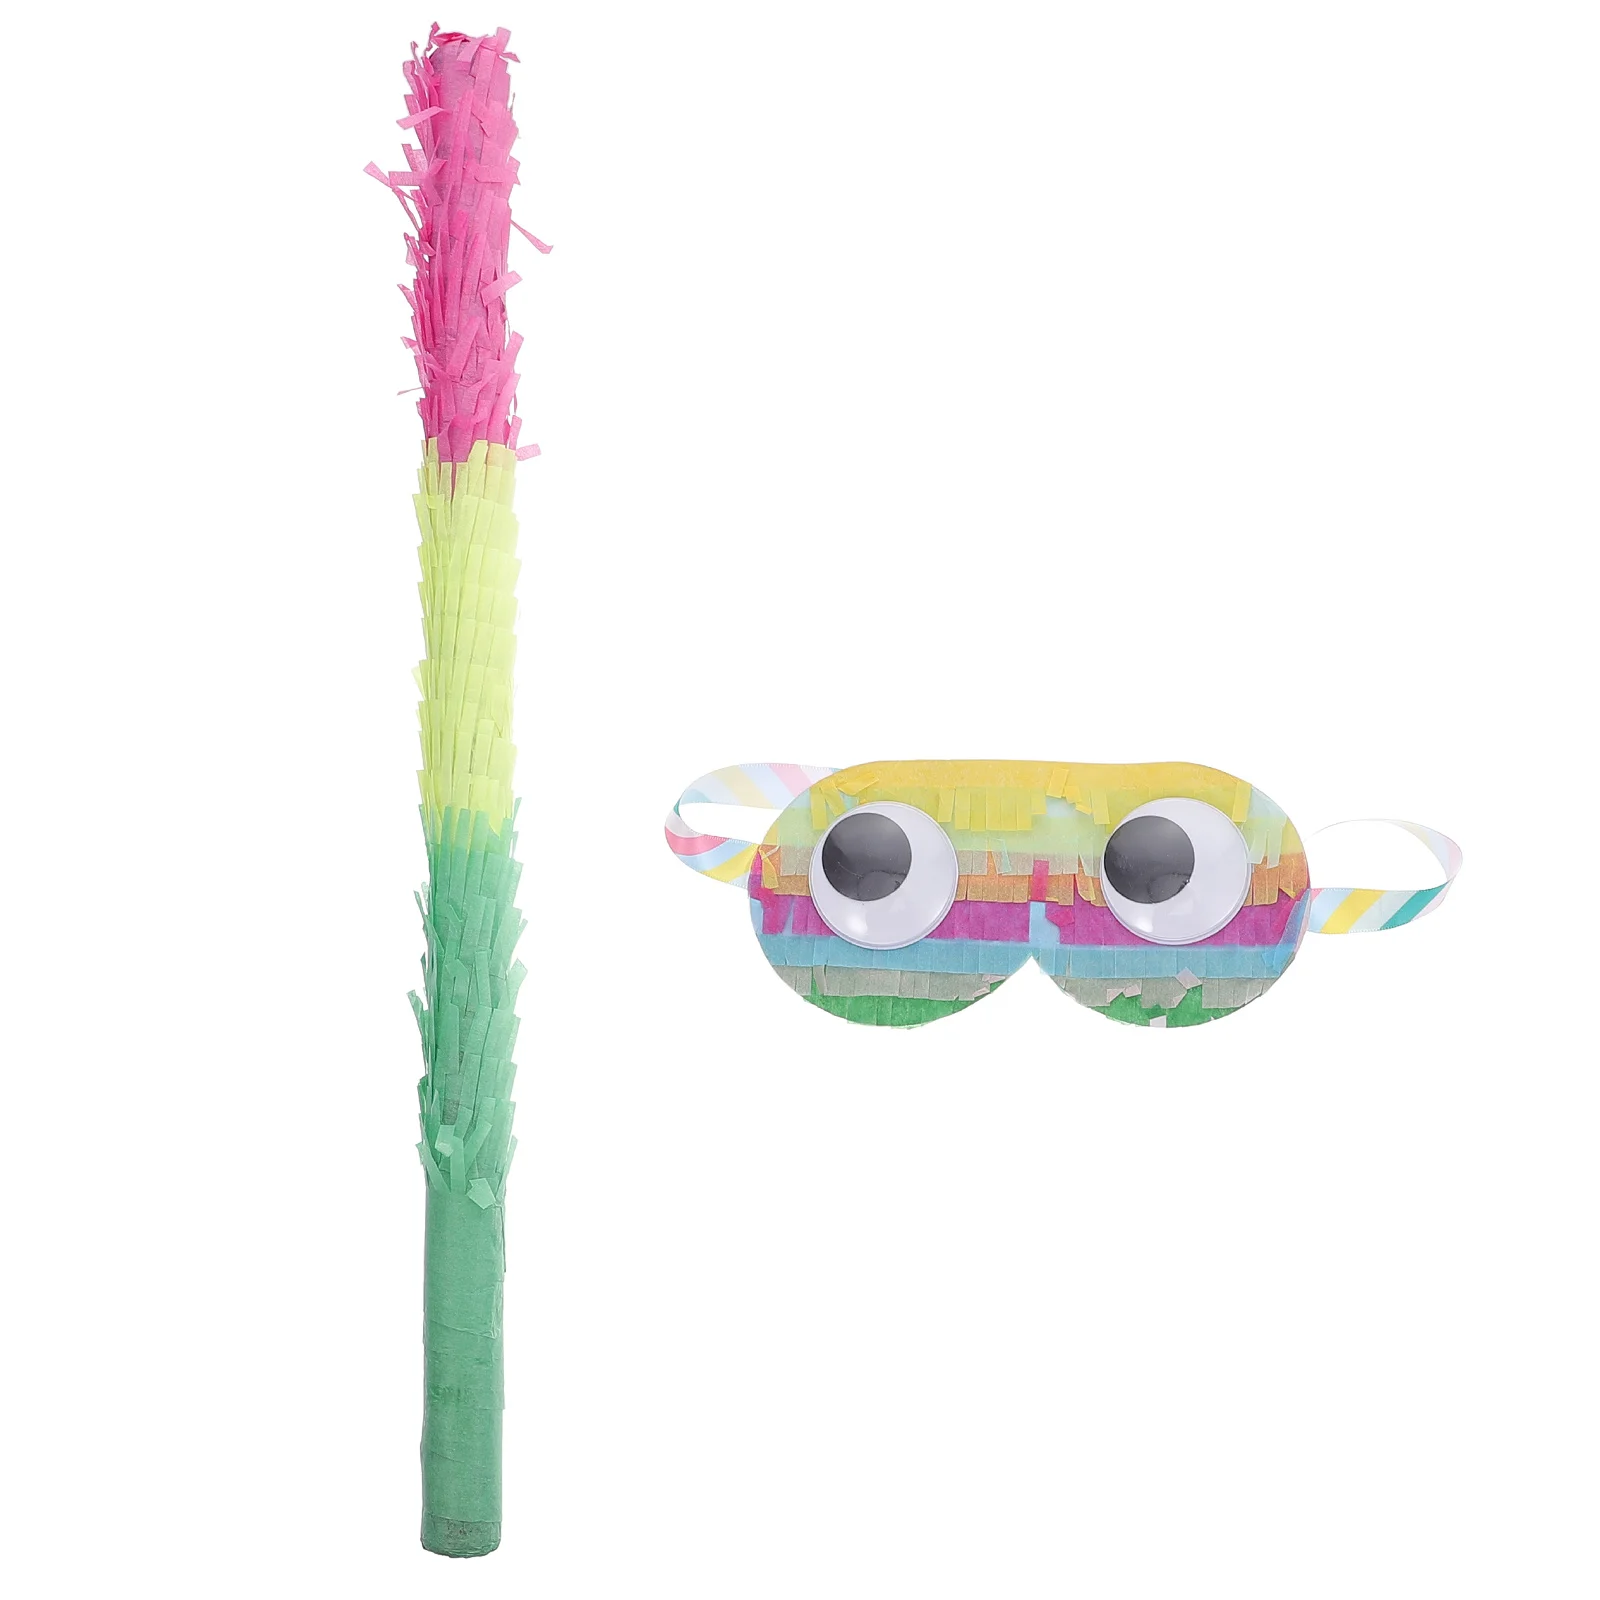 

2 Pcs Pinata Party Tools Children's Favor Candy Toy Multicolored Sticks Multi-Color Easy Grip Kids' Cardboard